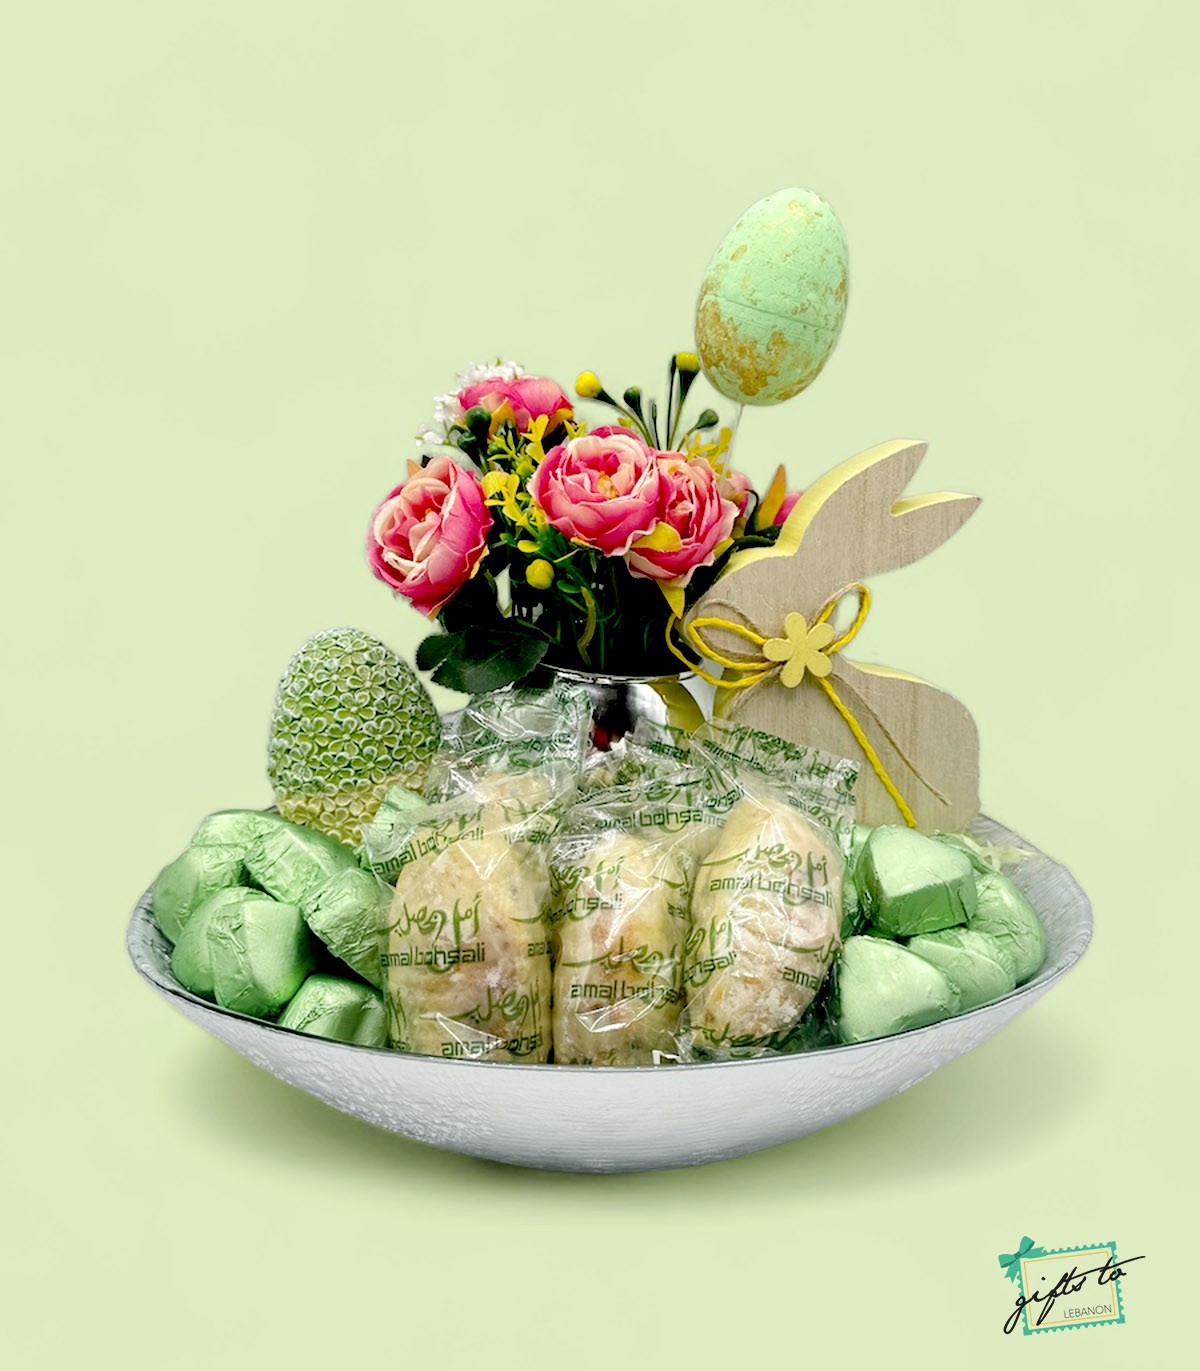 Easter Maamoul Assortment & Pistachio Chocolate Tray